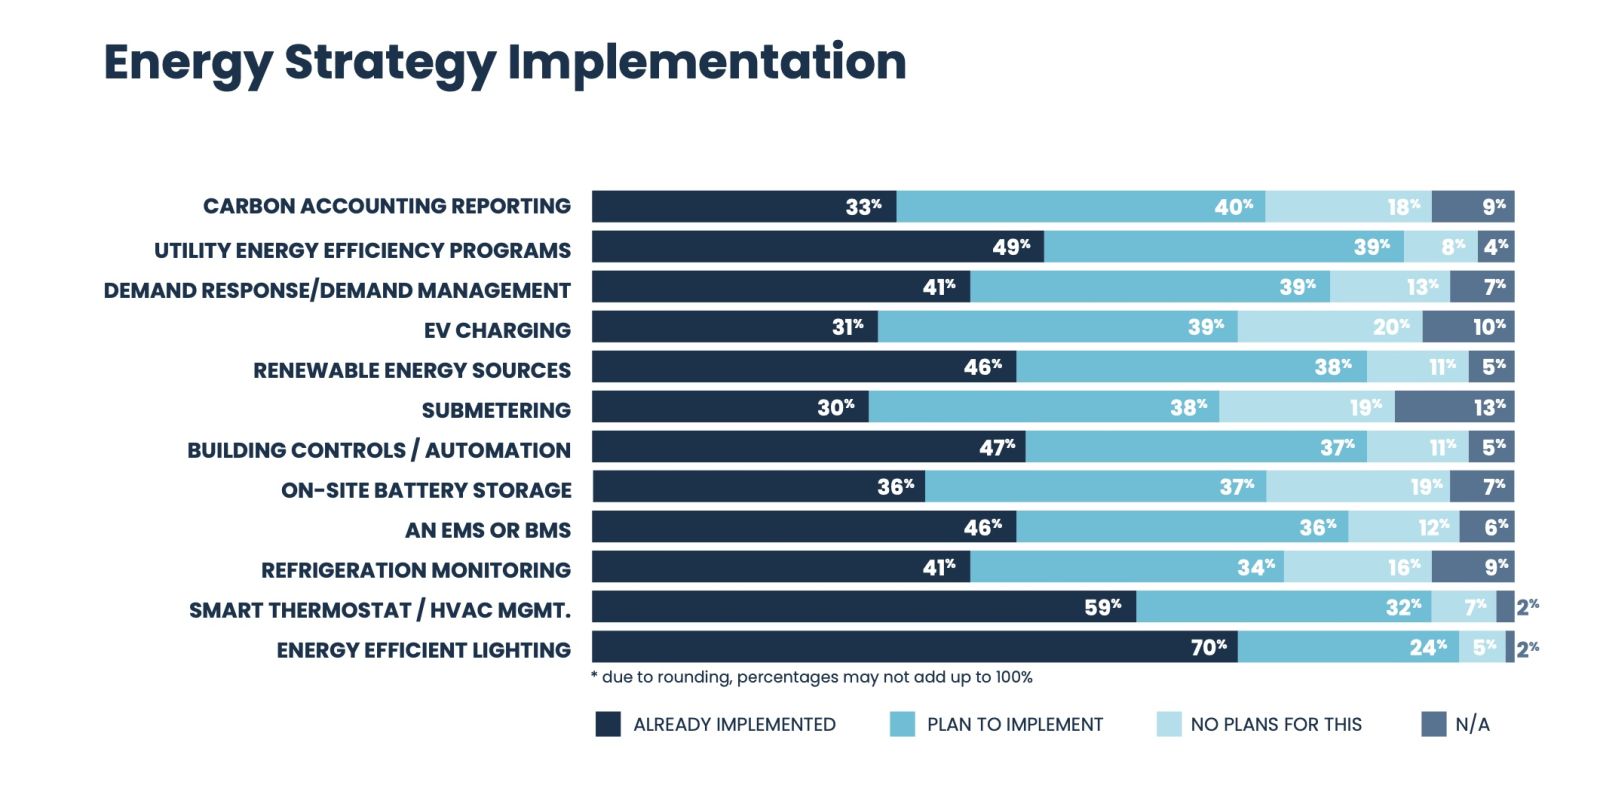 Gridpoint Energy Strategy Implementation